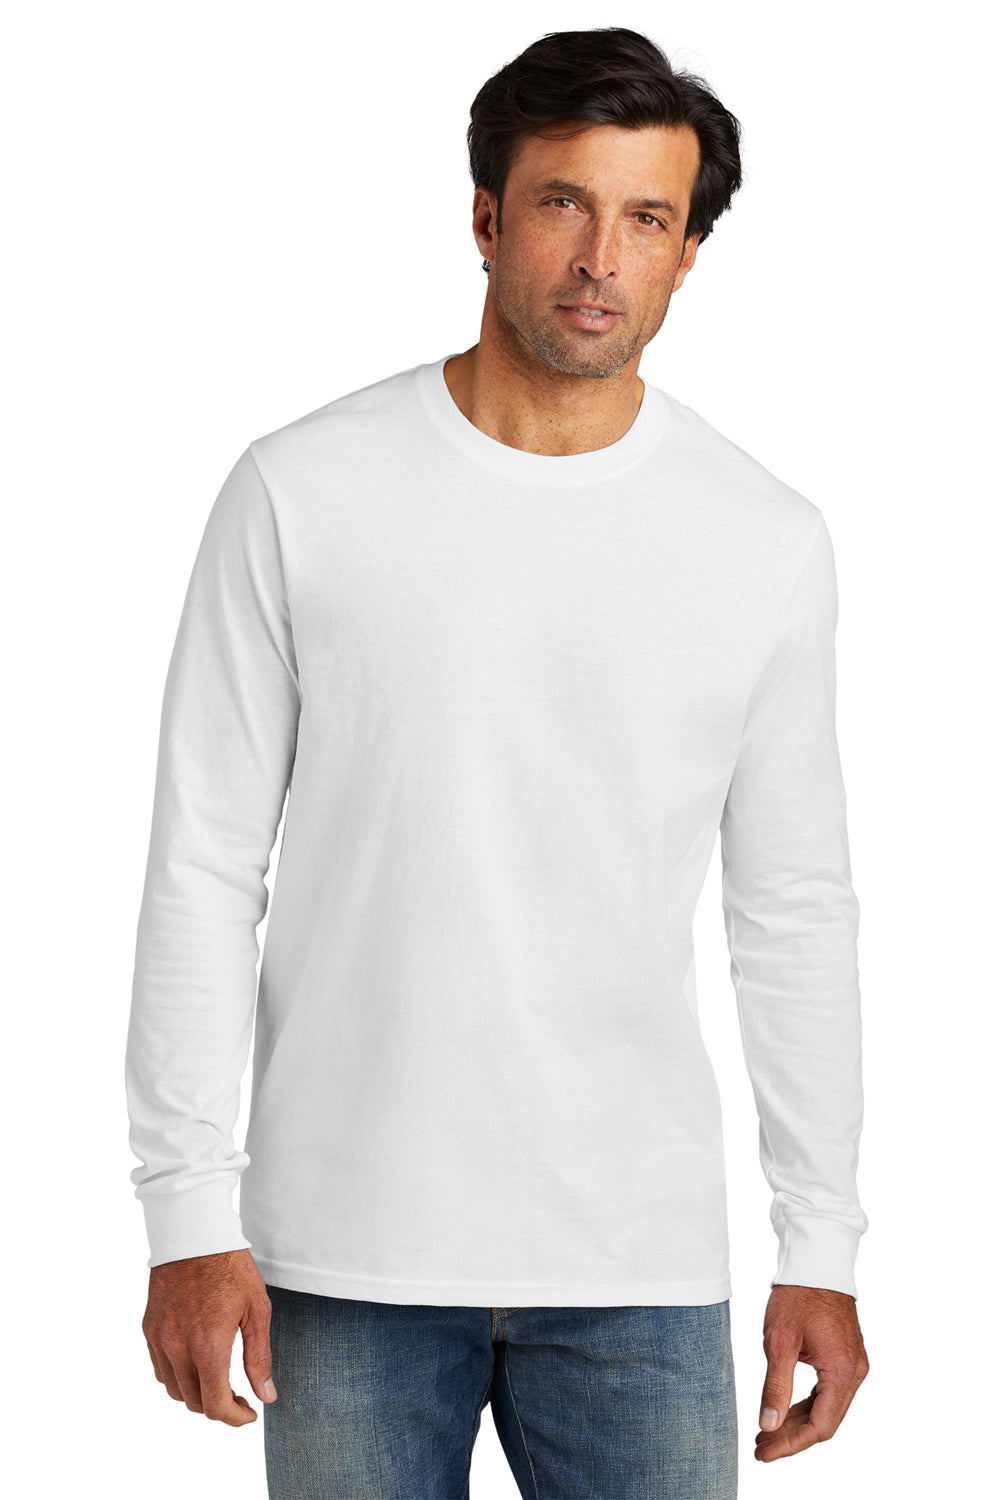 Volunteer Knitwear VL100LS USA Made All American Long Sleeve Crewneck T-Shirts White Front